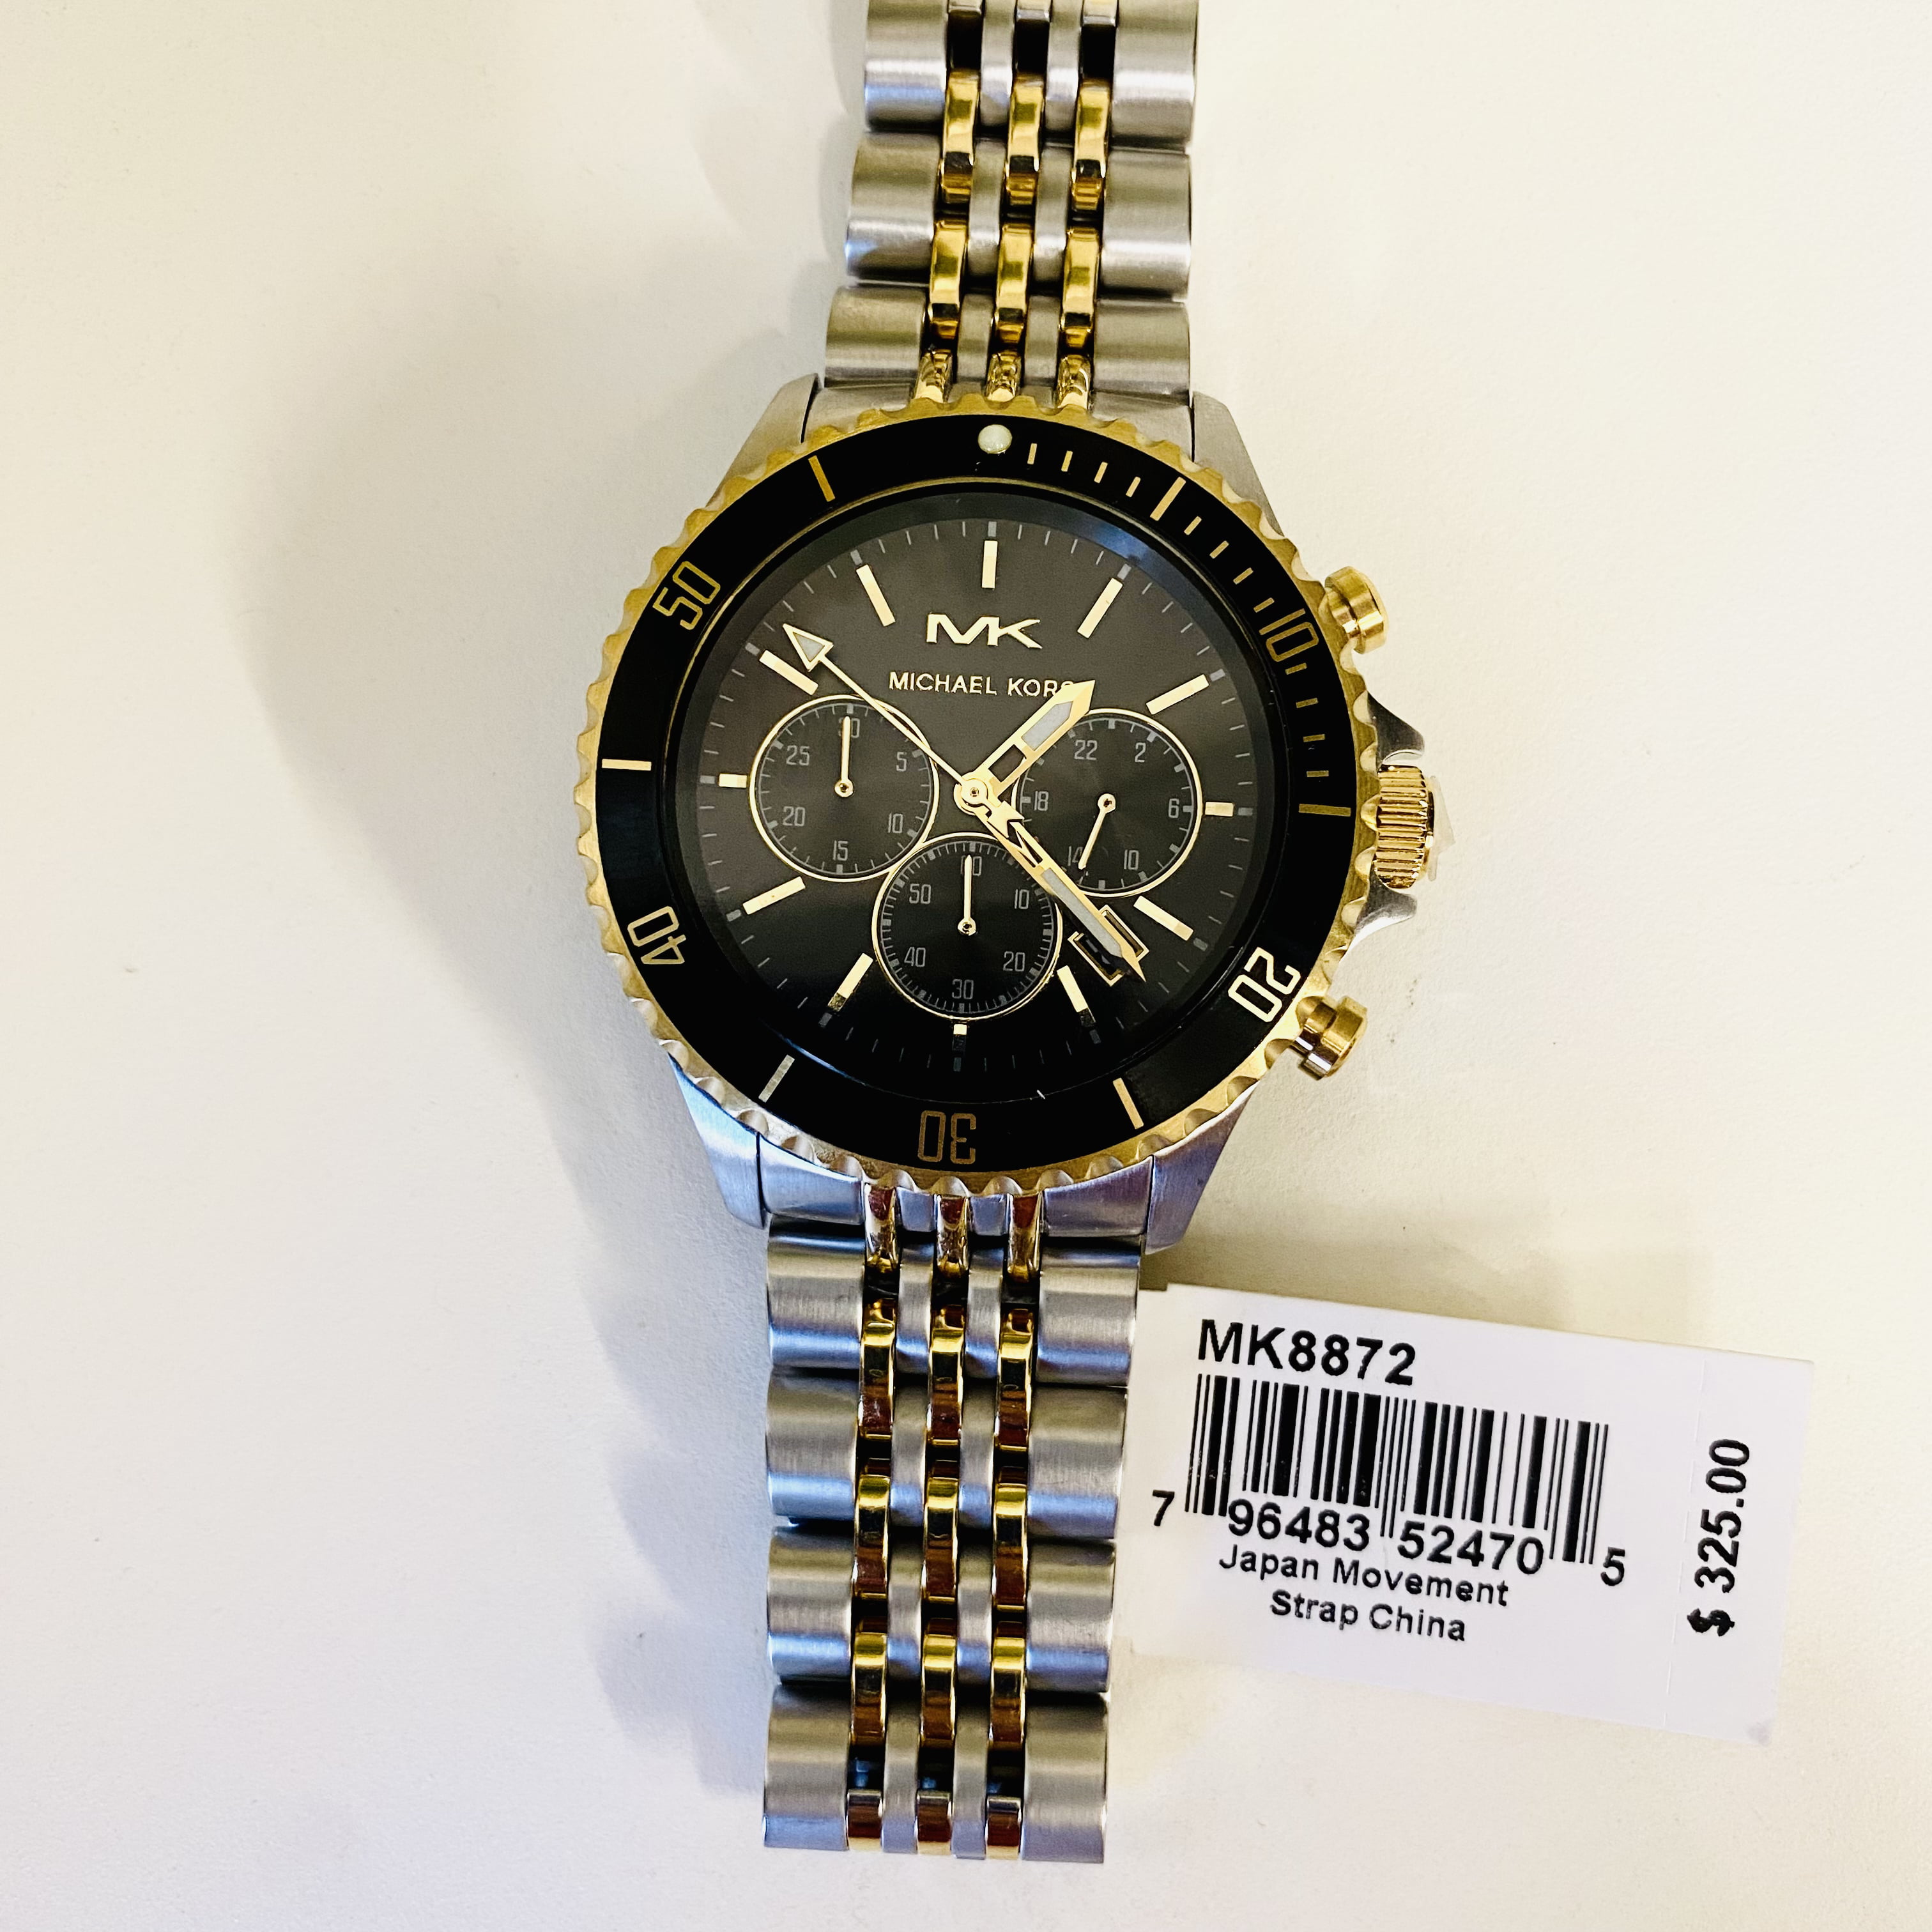 Michael Kors Bayville Two-Tone Stainless Steel Mens Watch MK8872